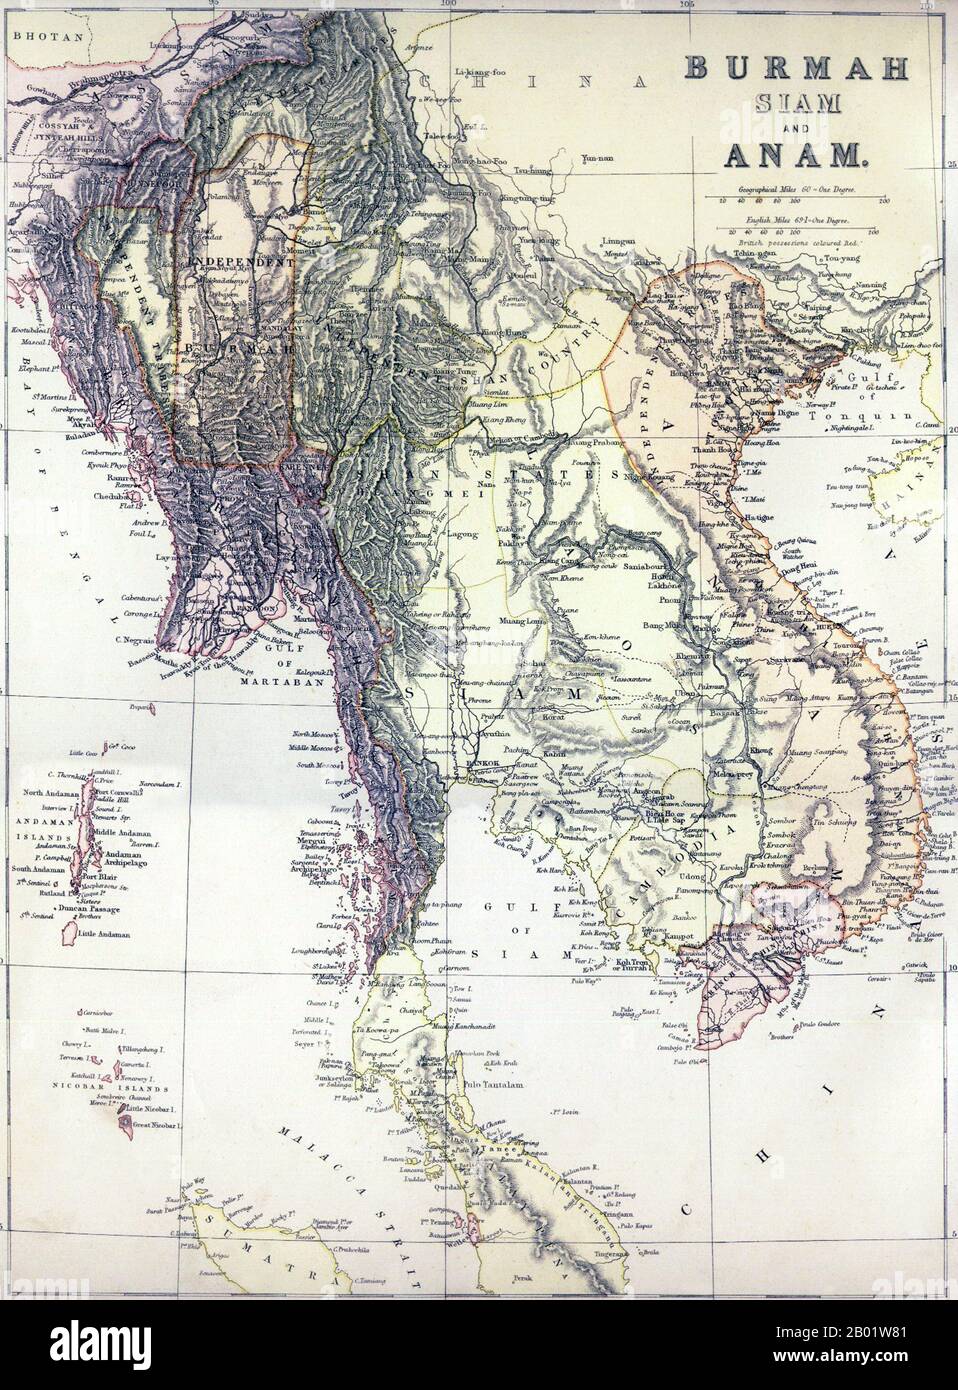 Southeast Asia: 'Burmah, Siam and Anam'. Map of Greater Indochina and the western part of the Malay-Indonesian Archipelago, 1886.  A political map of mainland Southeast Asia including Burma, Thailand, Laos, Cambodia and Vietnam, as well as peninsular Malaysia, the Andaman and Nicobar Islands, and part of Sumatra  Published, apparently, just before the 3rd Anglo-Burmese War (1885-1886) which would extinguish Burmese independence, it shows 'Independent Burma' in an approximate rectangle around Mandalay. To the east lies the 'Independent Shan Country' encompassing the Burmese Shan States. Stock Photo